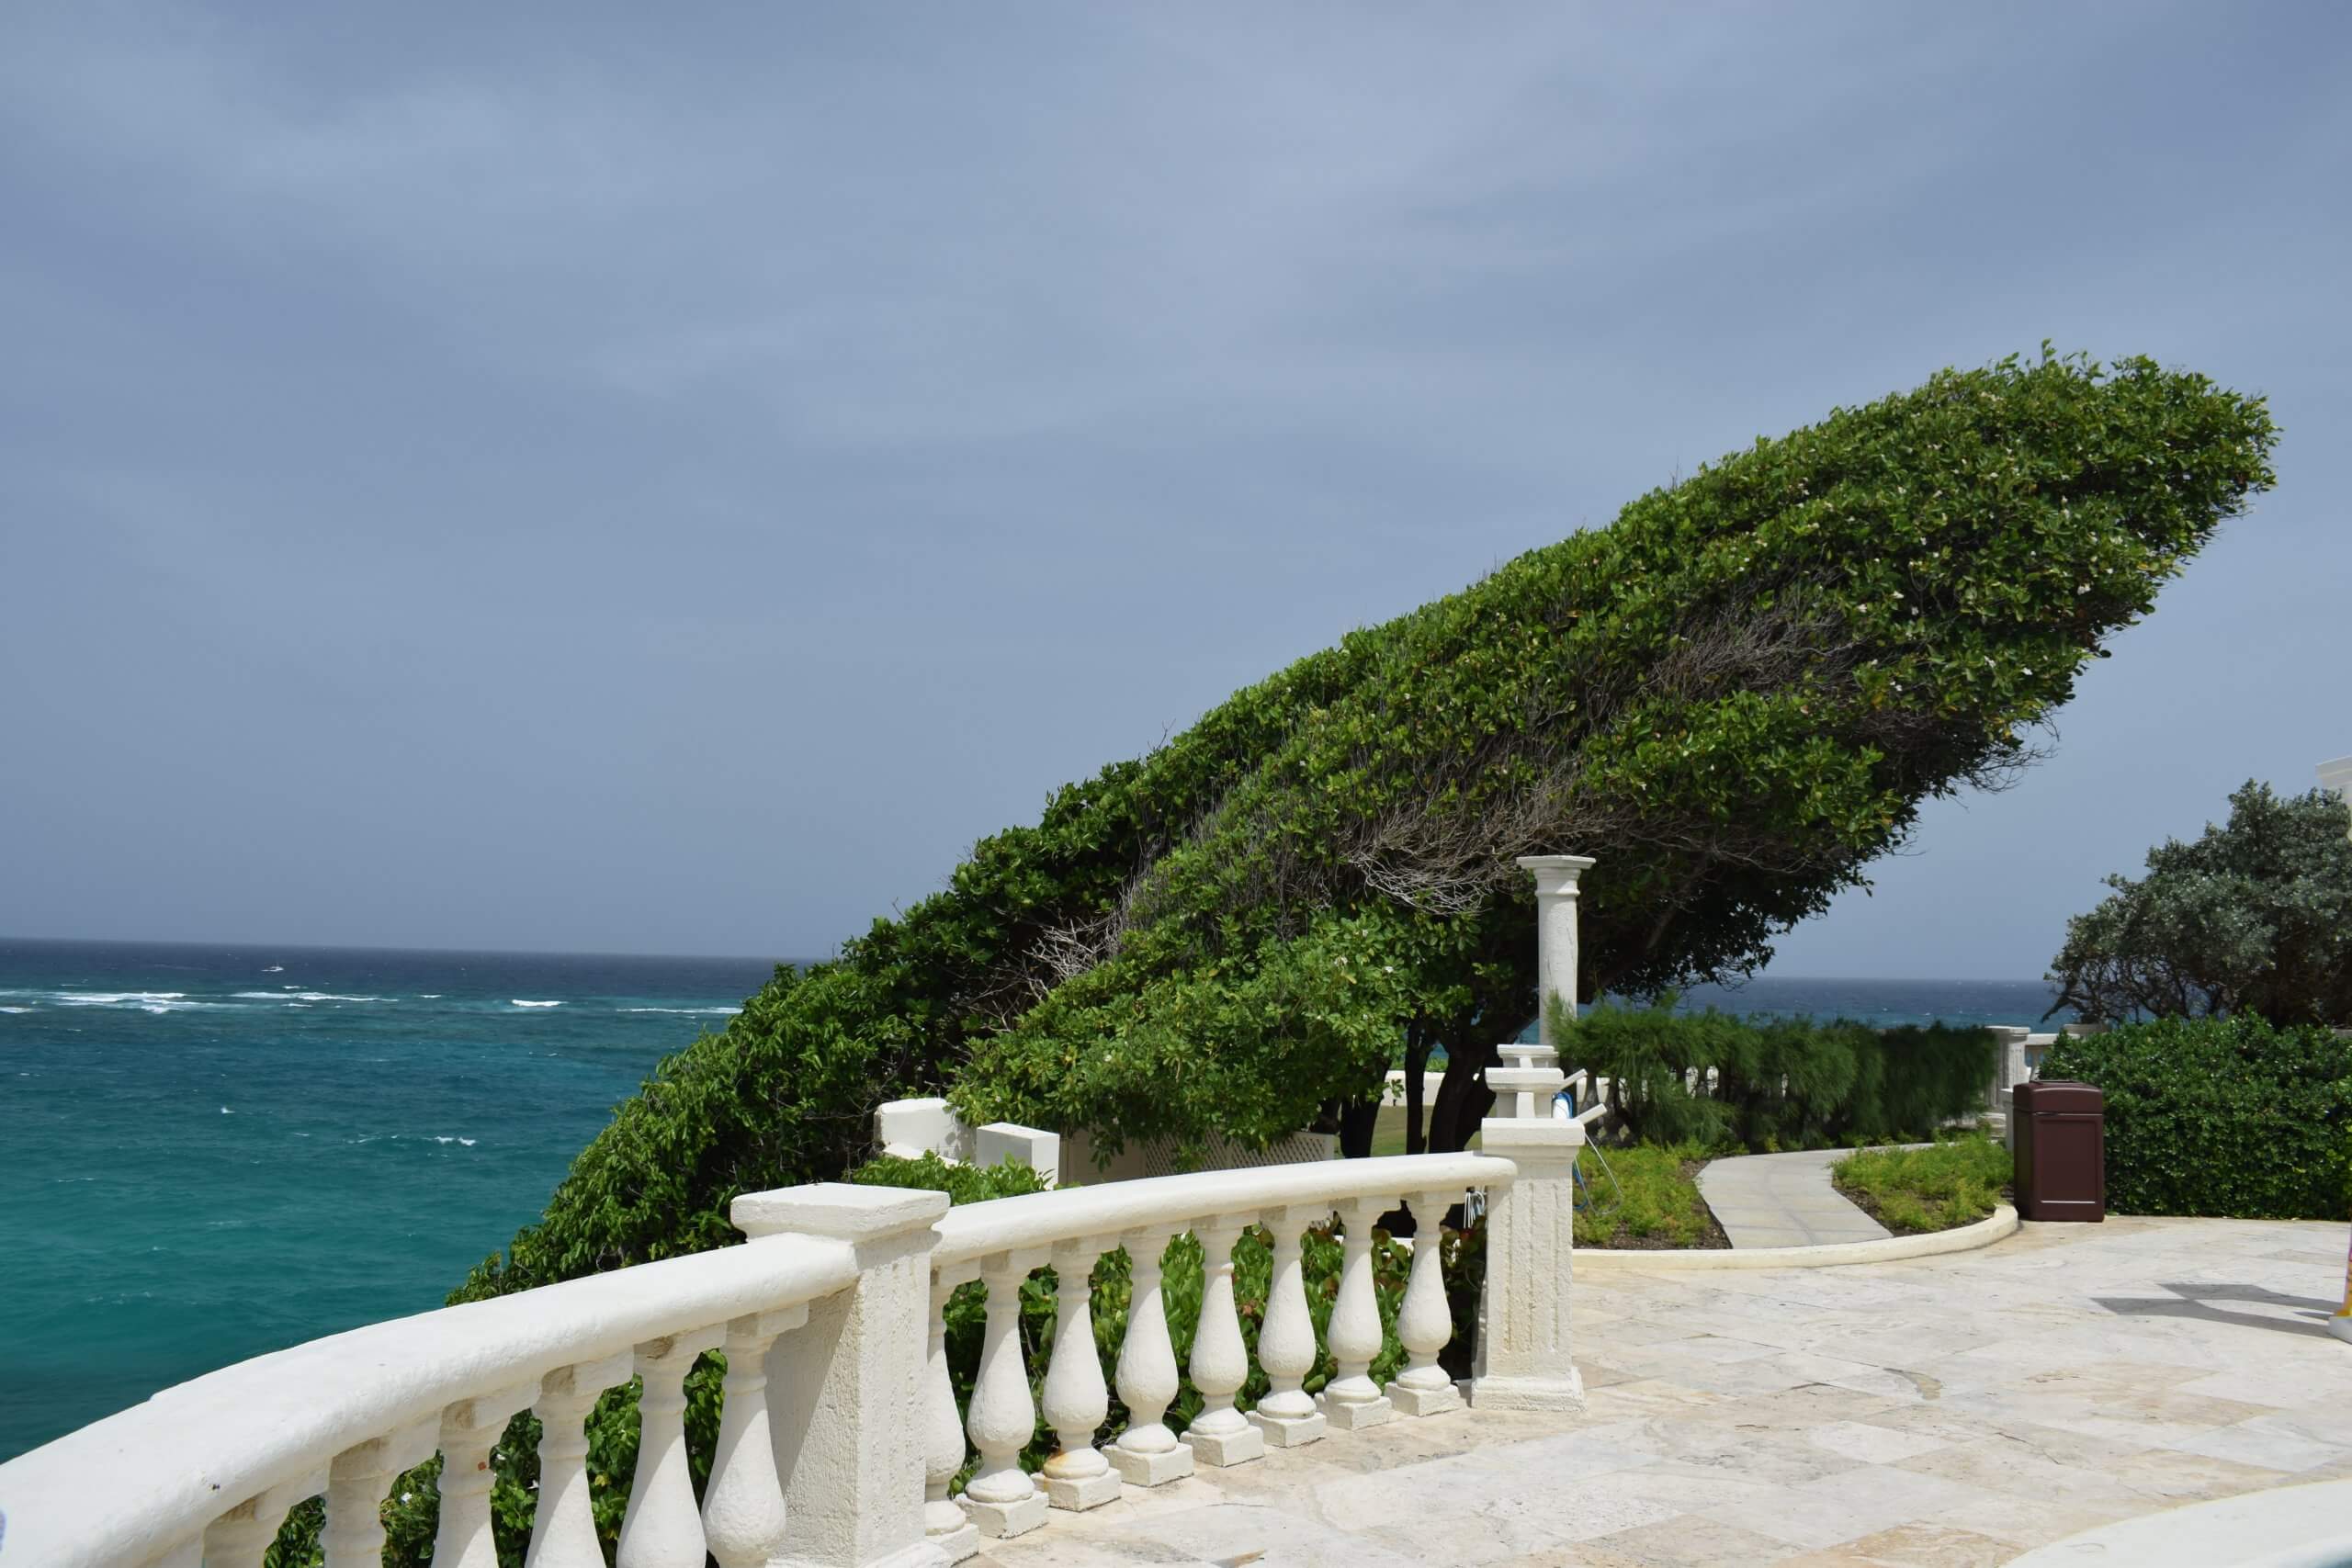 Wind sculpted trees at Crane Beach Hotel, Barbados